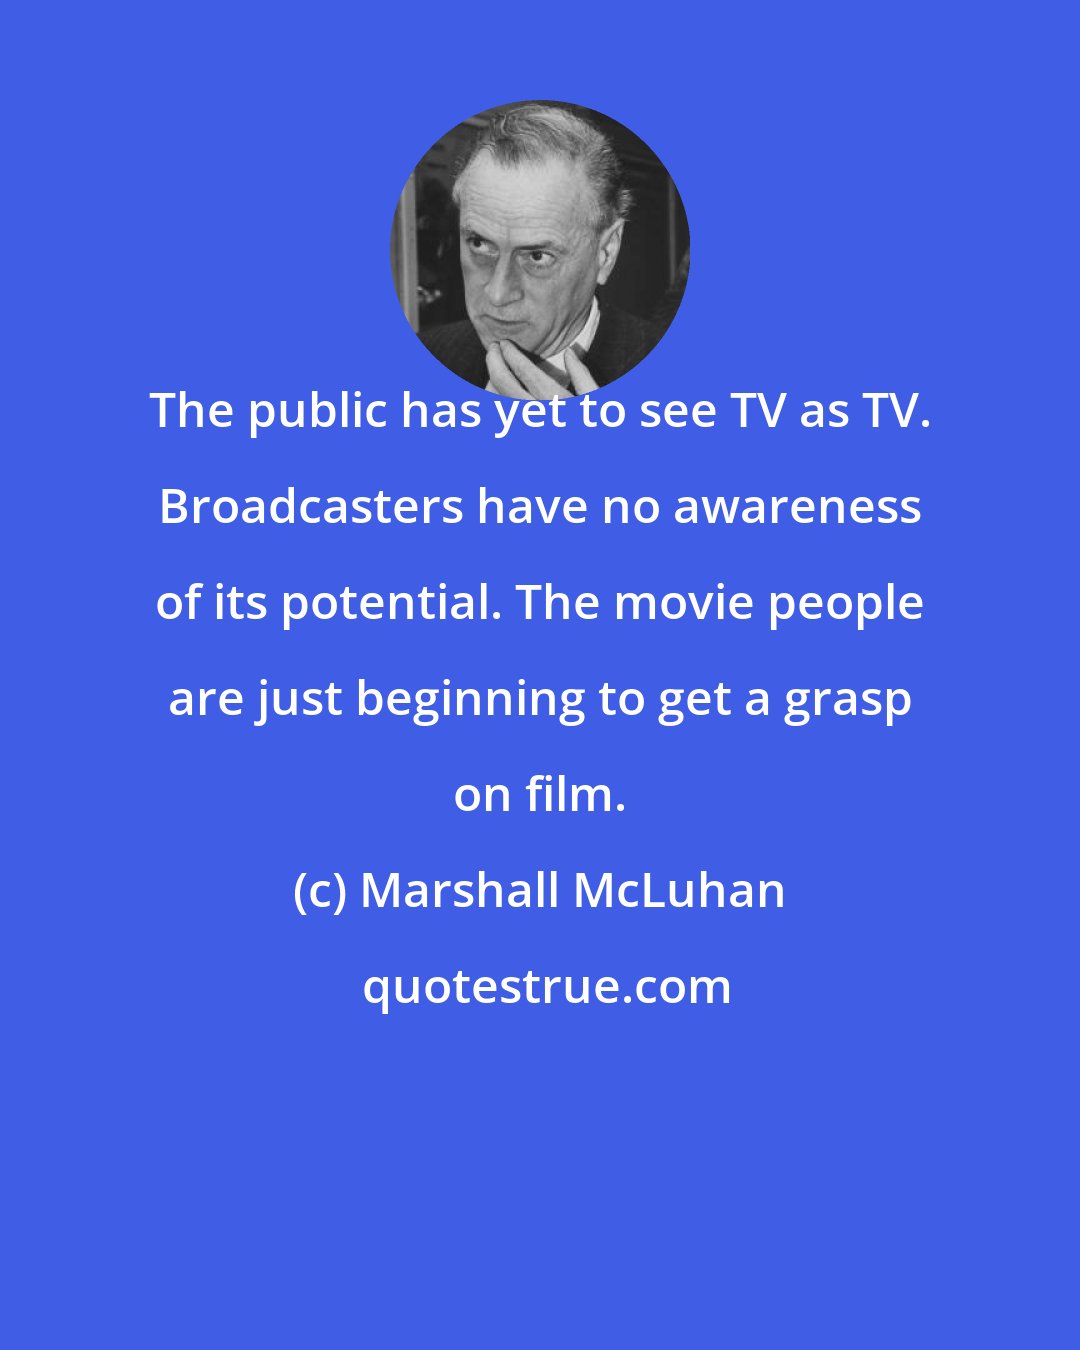 Marshall McLuhan: The public has yet to see TV as TV. Broadcasters have no awareness of its potential. The movie people are just beginning to get a grasp on film.